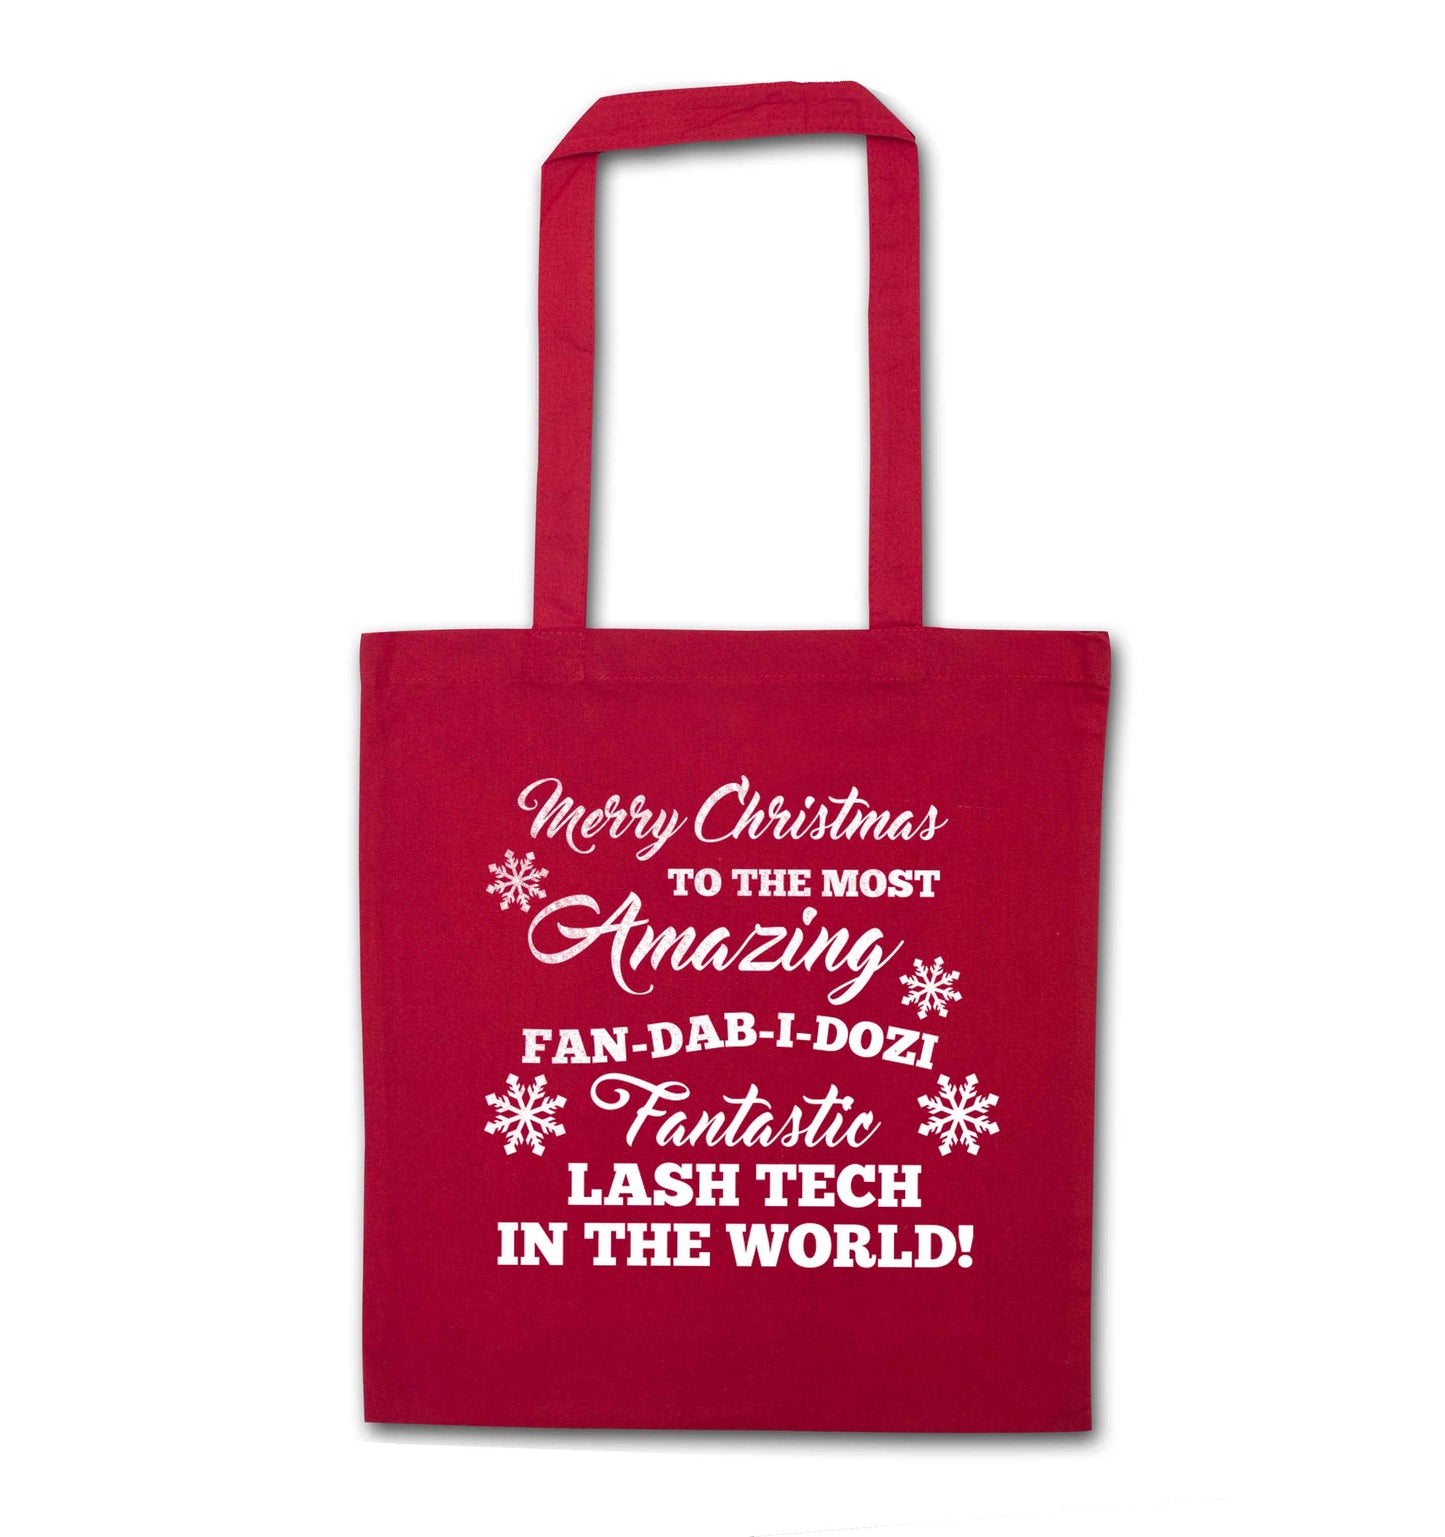 Merry Christmas to the most amazing fan-dab-i-dozi fantasic lash tech in the world red tote bag